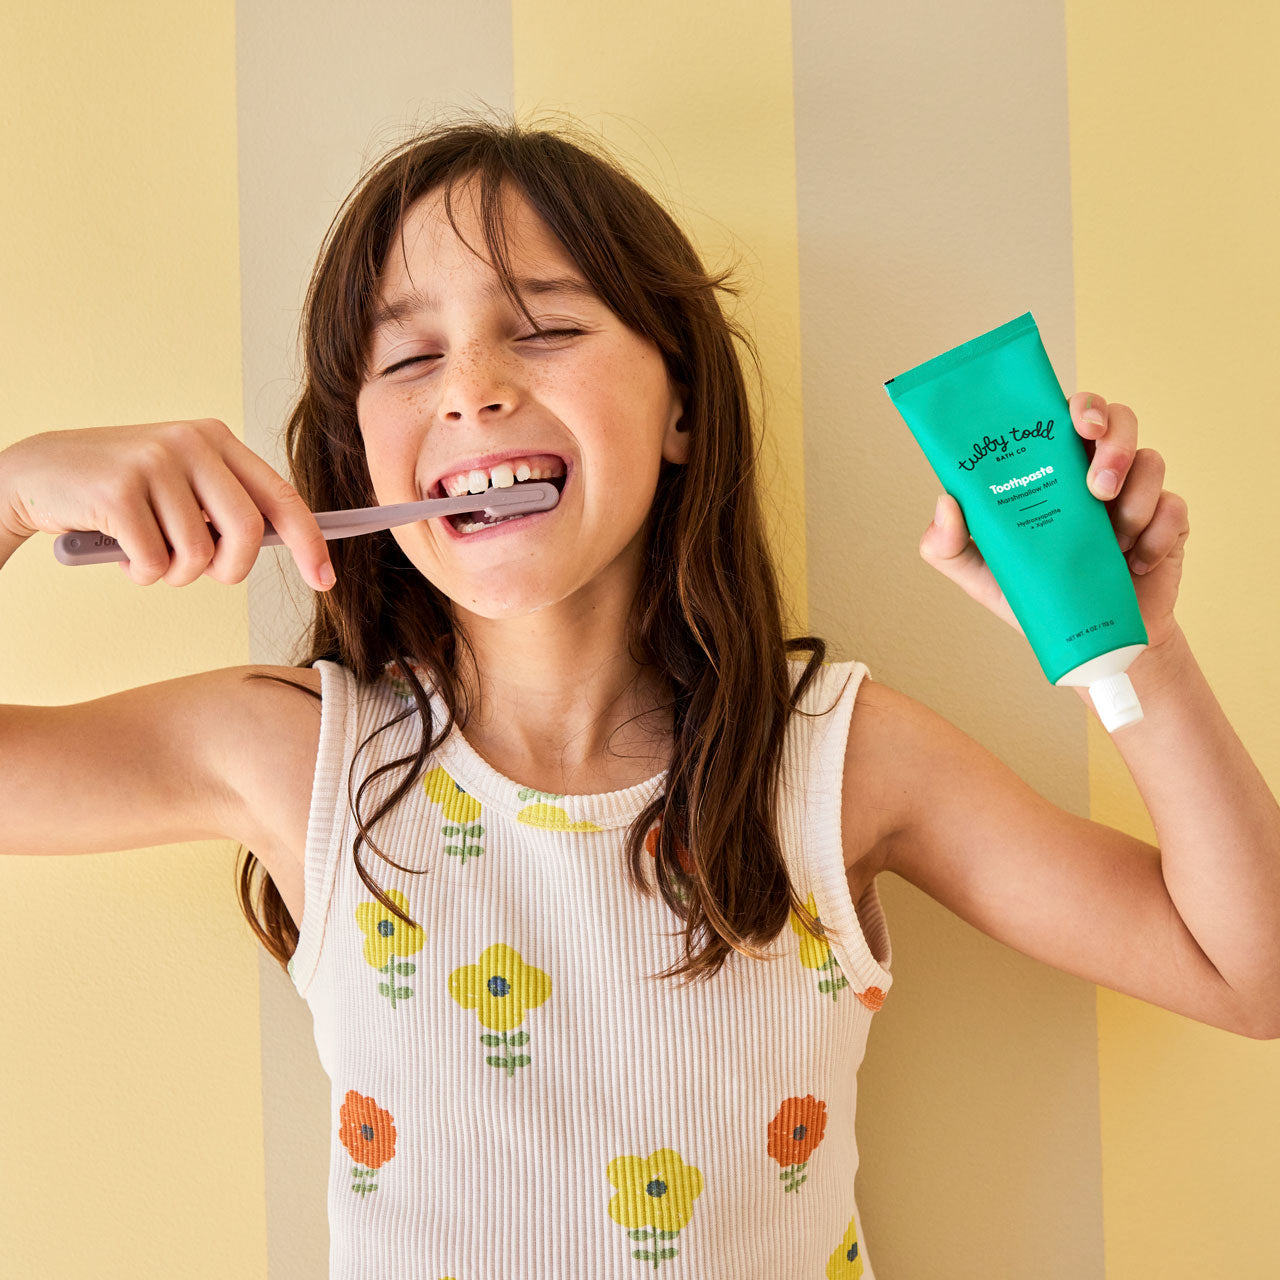 Child smiling while brushing her teeth and holding up toothpaste